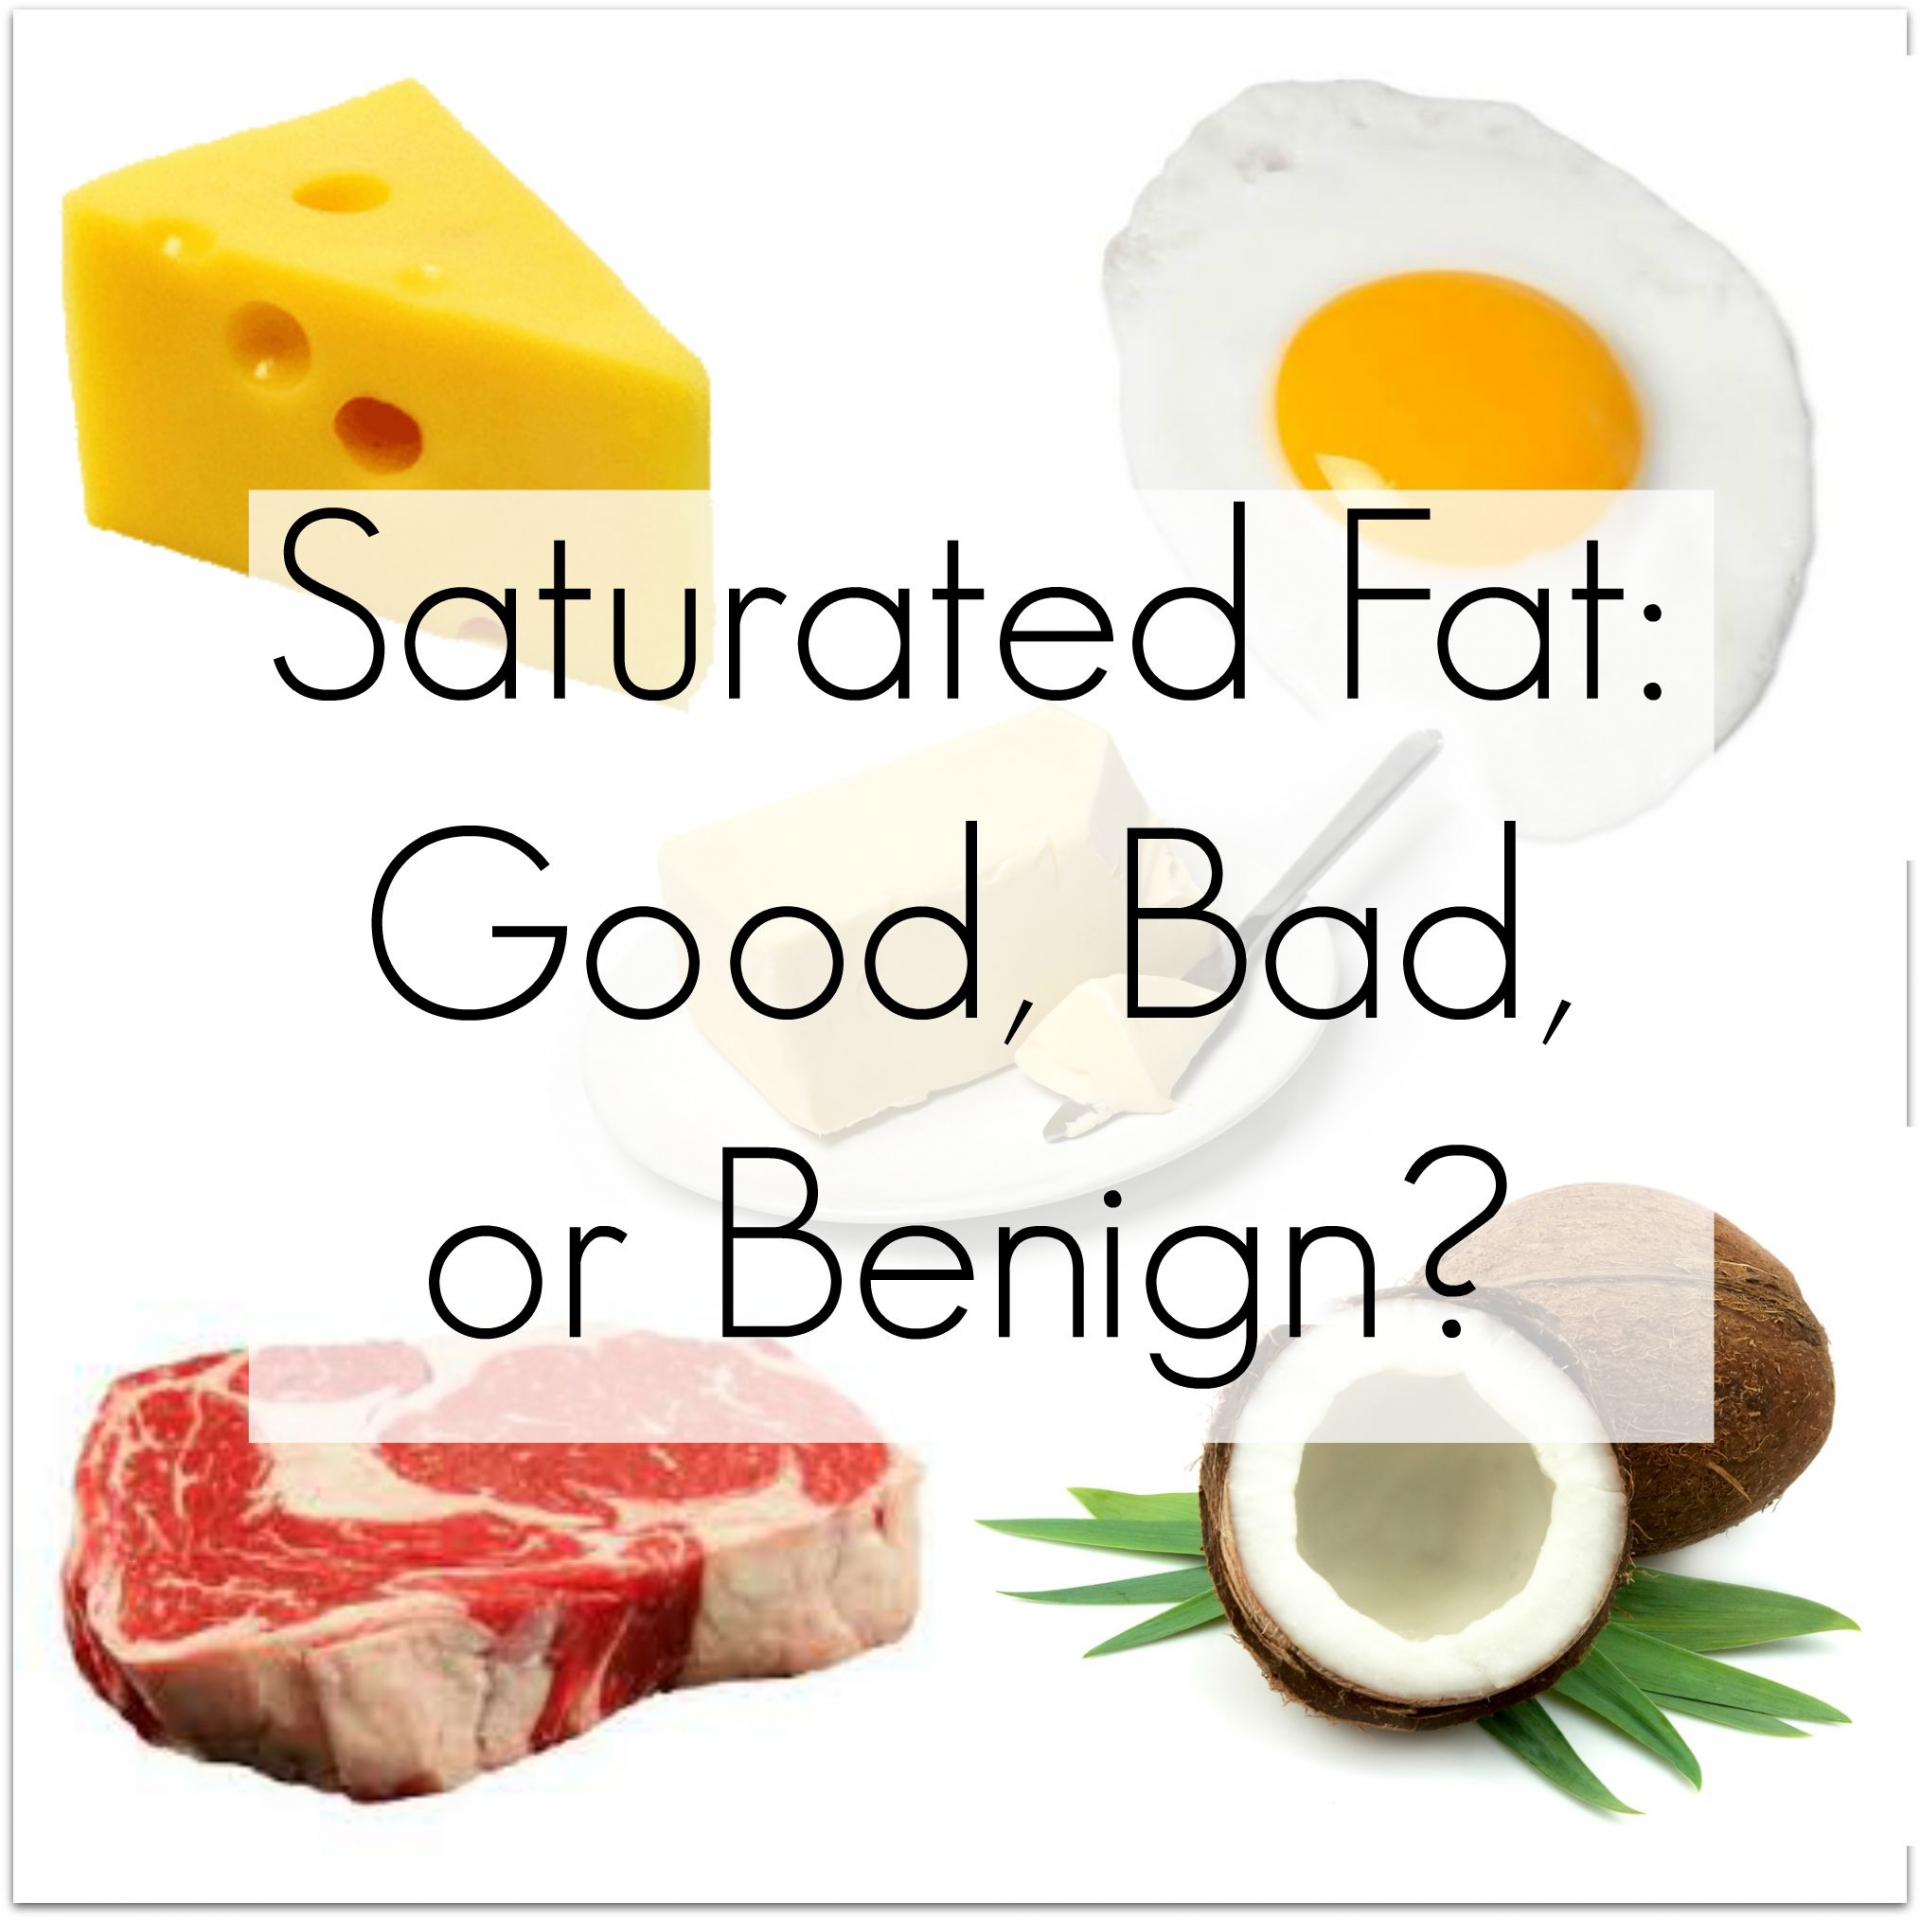 A single meal containing high saturated fat can cause your focus to dwindle, study finds